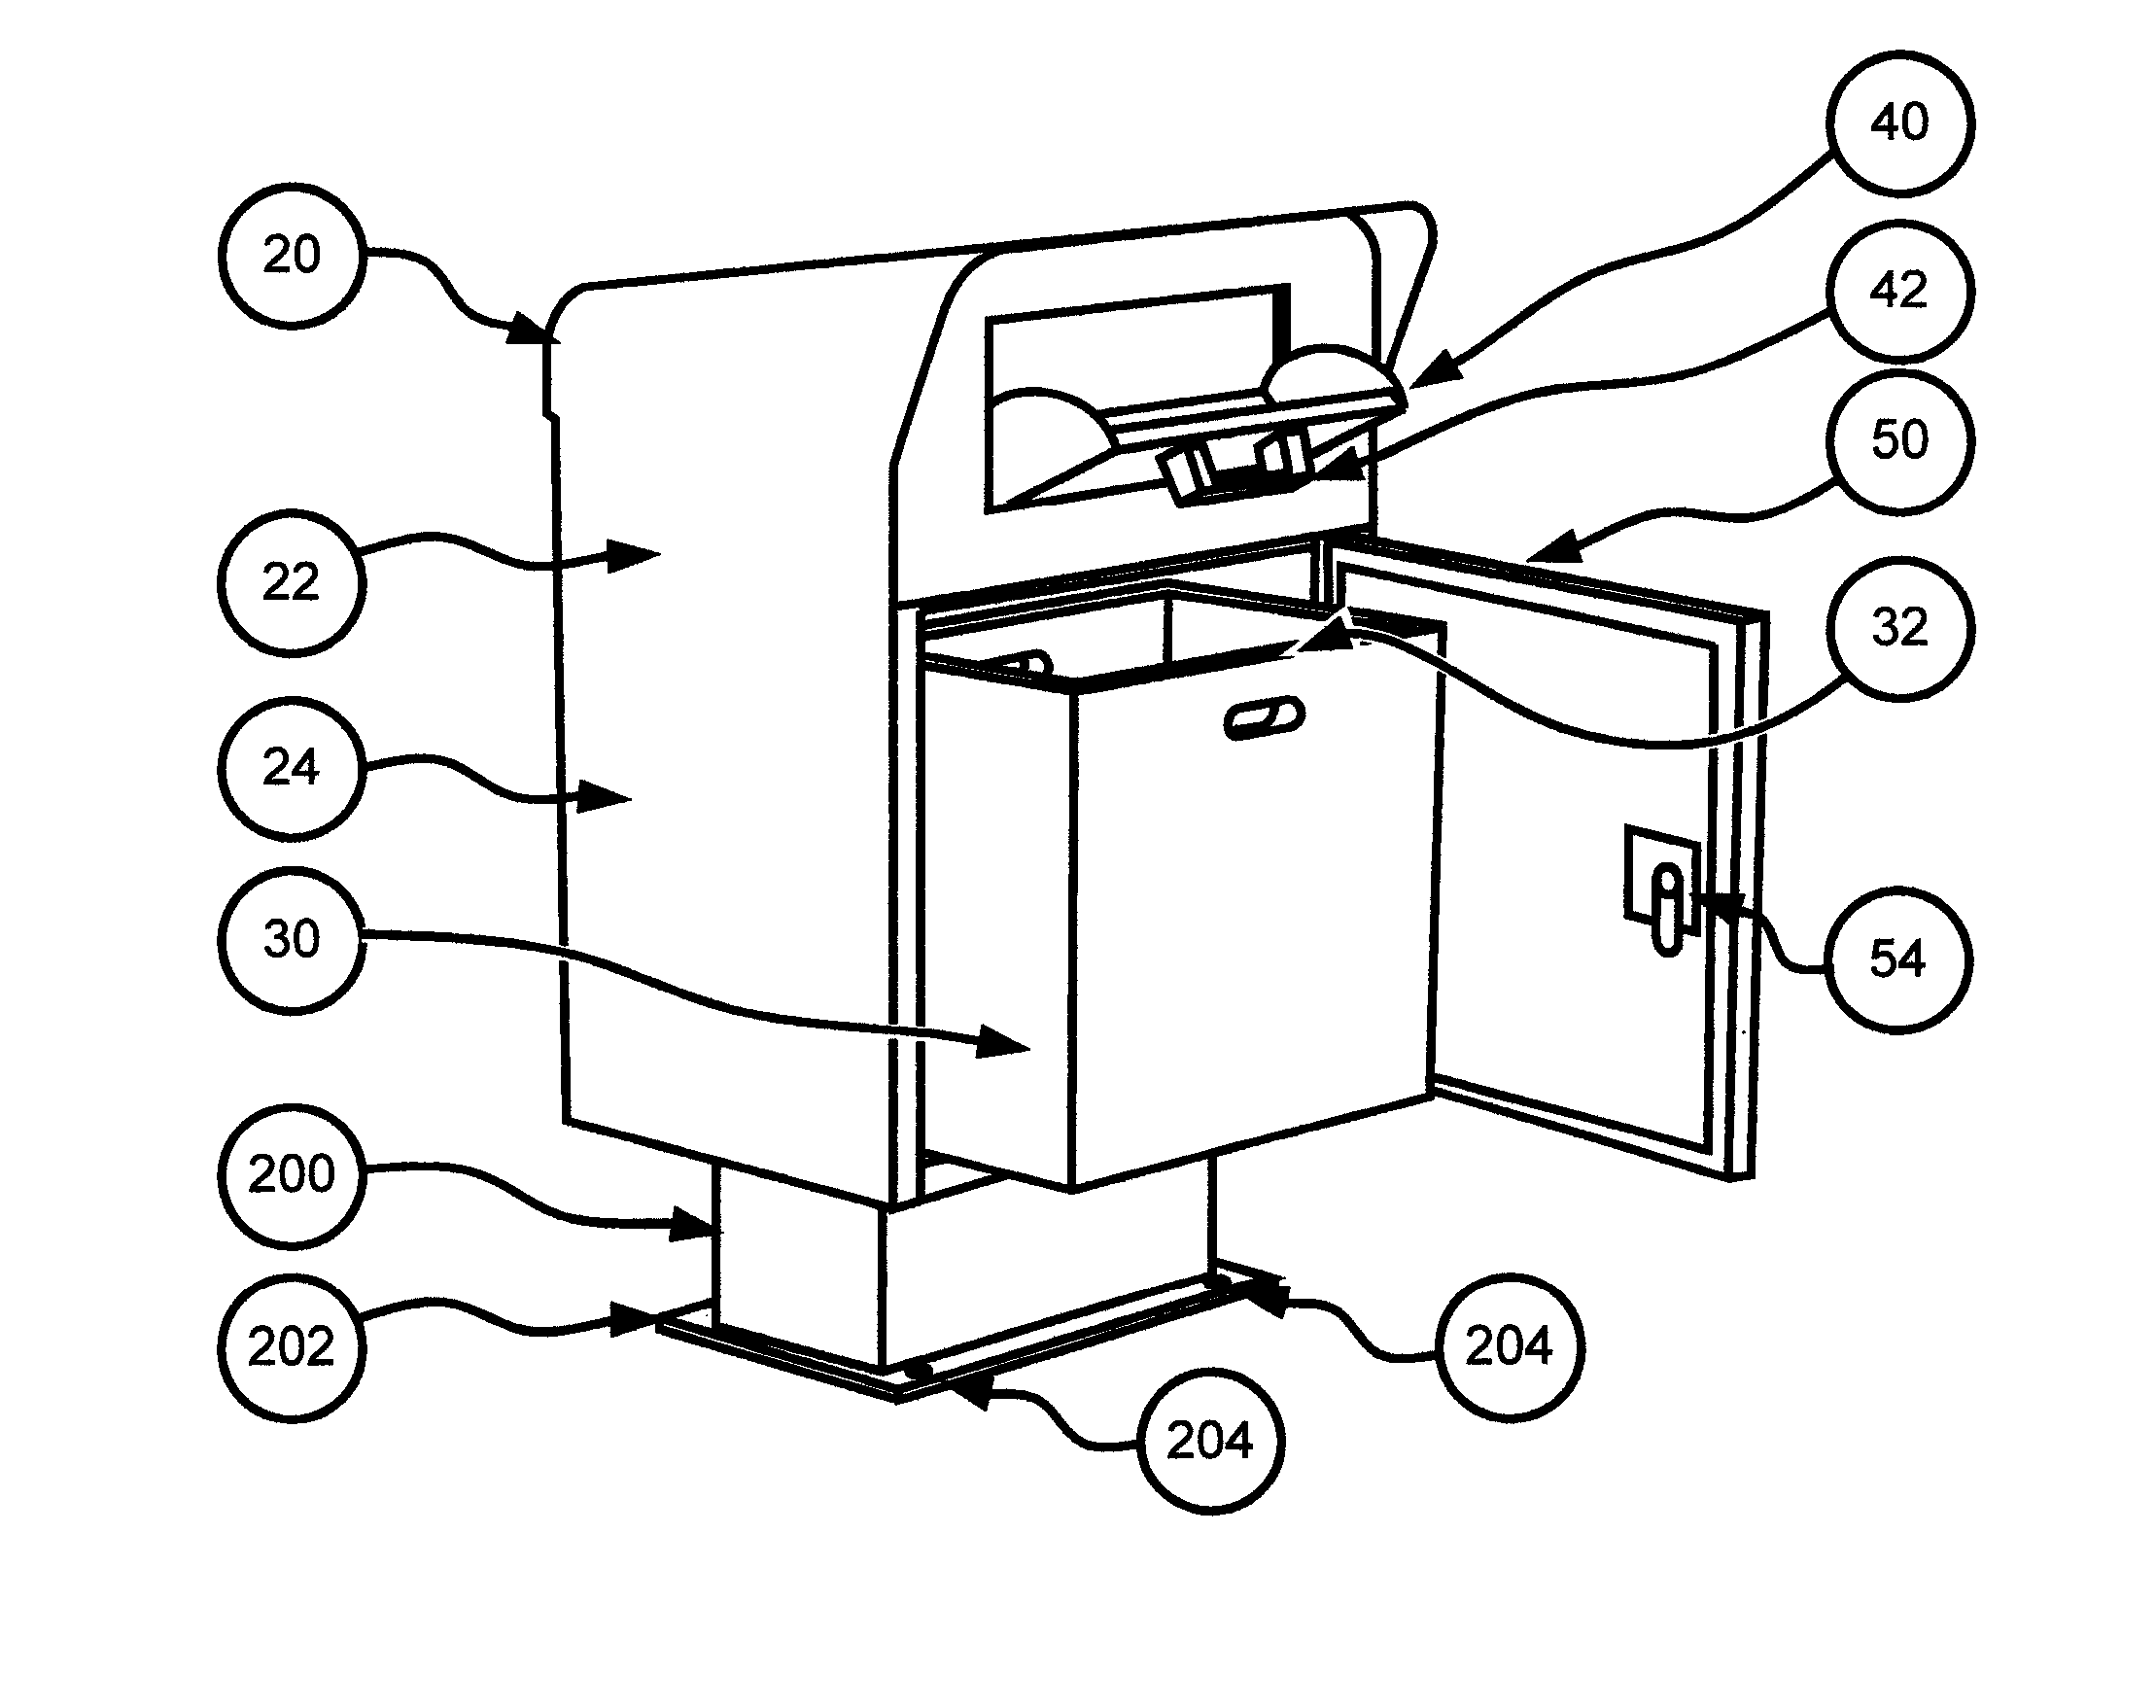 System and methods of preserving integrity and securely transporting biological specimens to a depository and devices for securely storing biological specimens